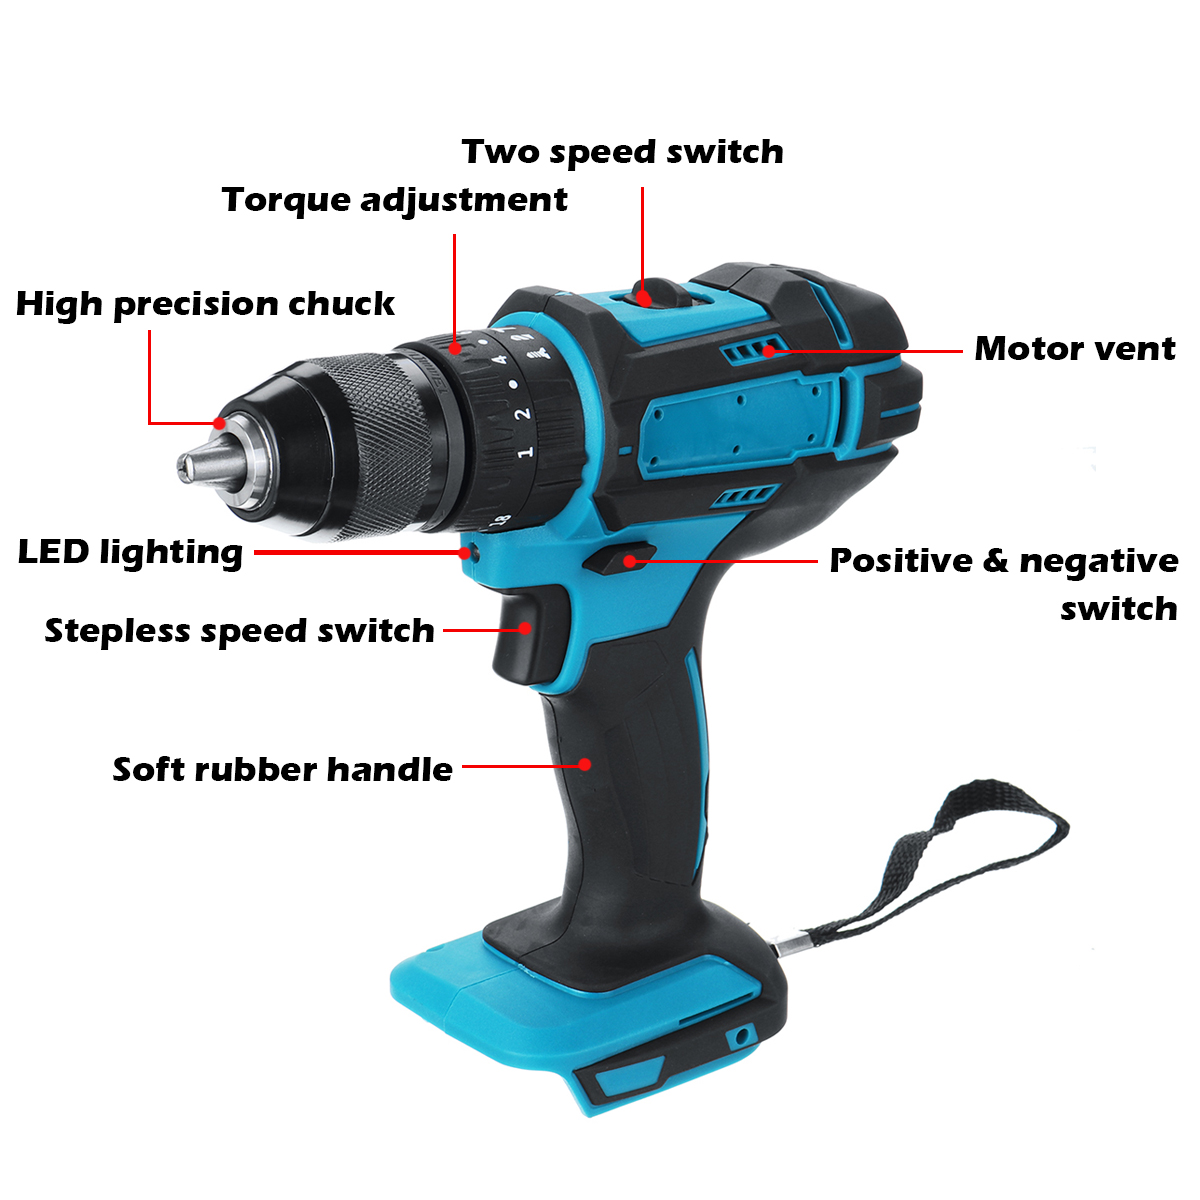 10mm-Chuck-Impact-Drill-350Nm-Cordless-Electric-Drill-For-Makita-18V-Battery-4000RPM-LED-Light-Power-1642853-10